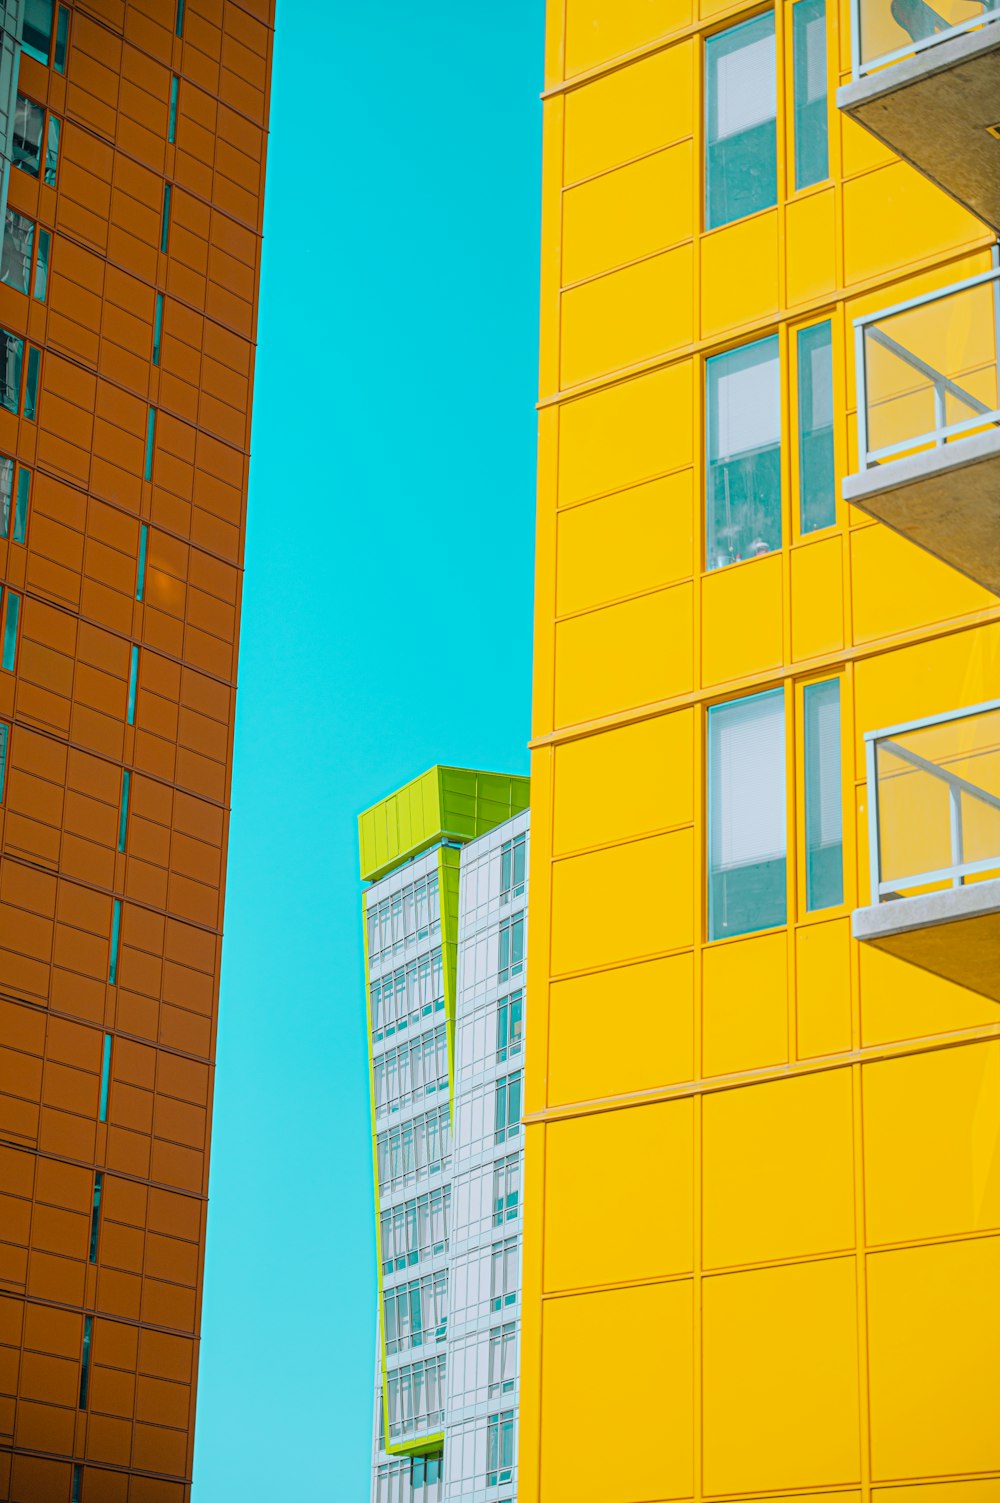 a yellow building next to a tall orange building